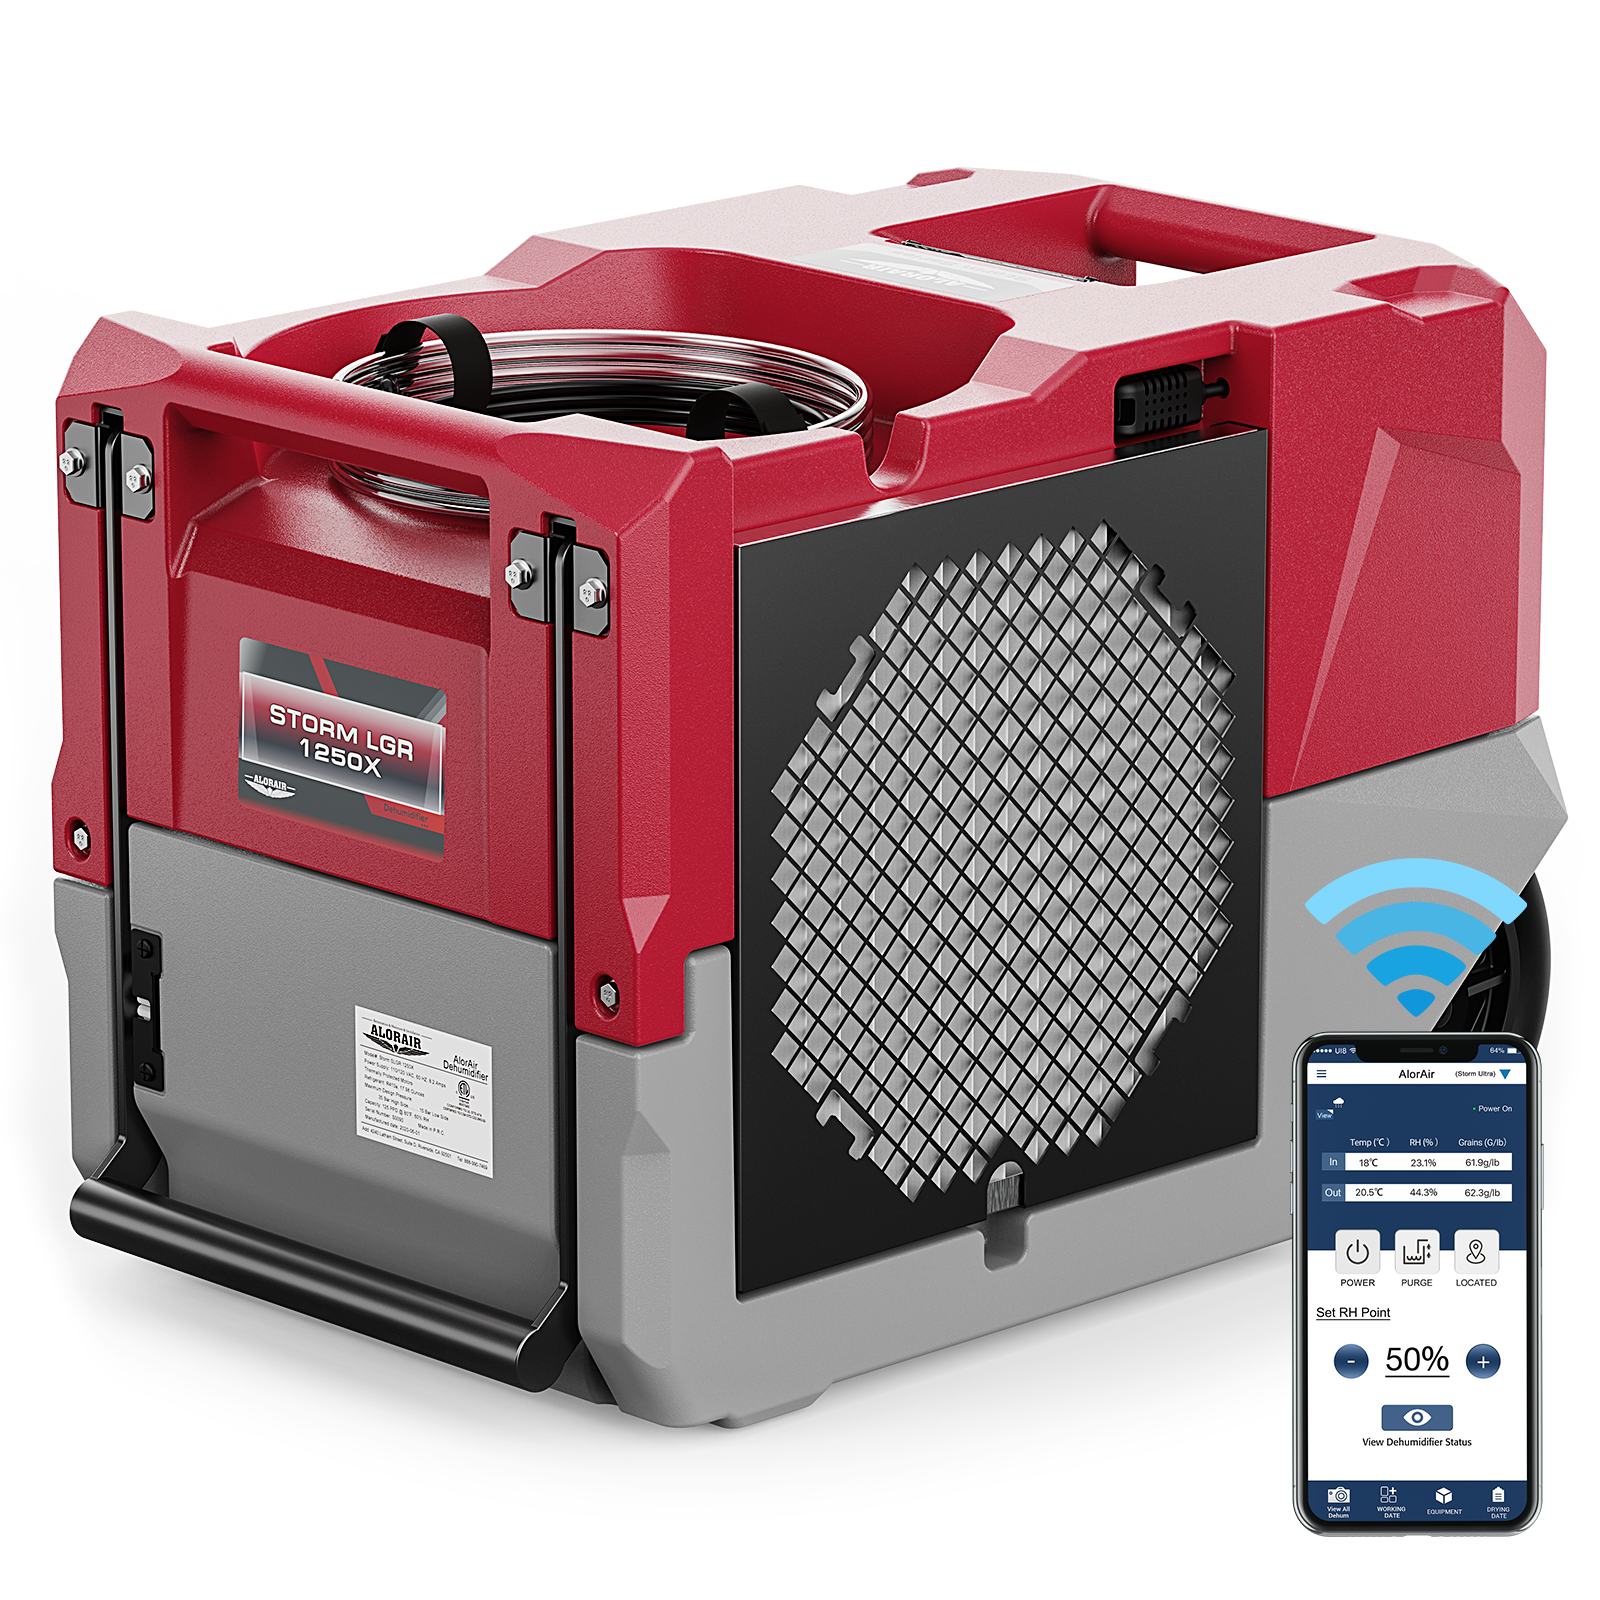 AlorAir® Storm LGR 1250X | Smart Wi-Fi 264 PPD Industrial Commercial Dehumidifiers with Pump for Basements, Garages, and Job Sites, Red